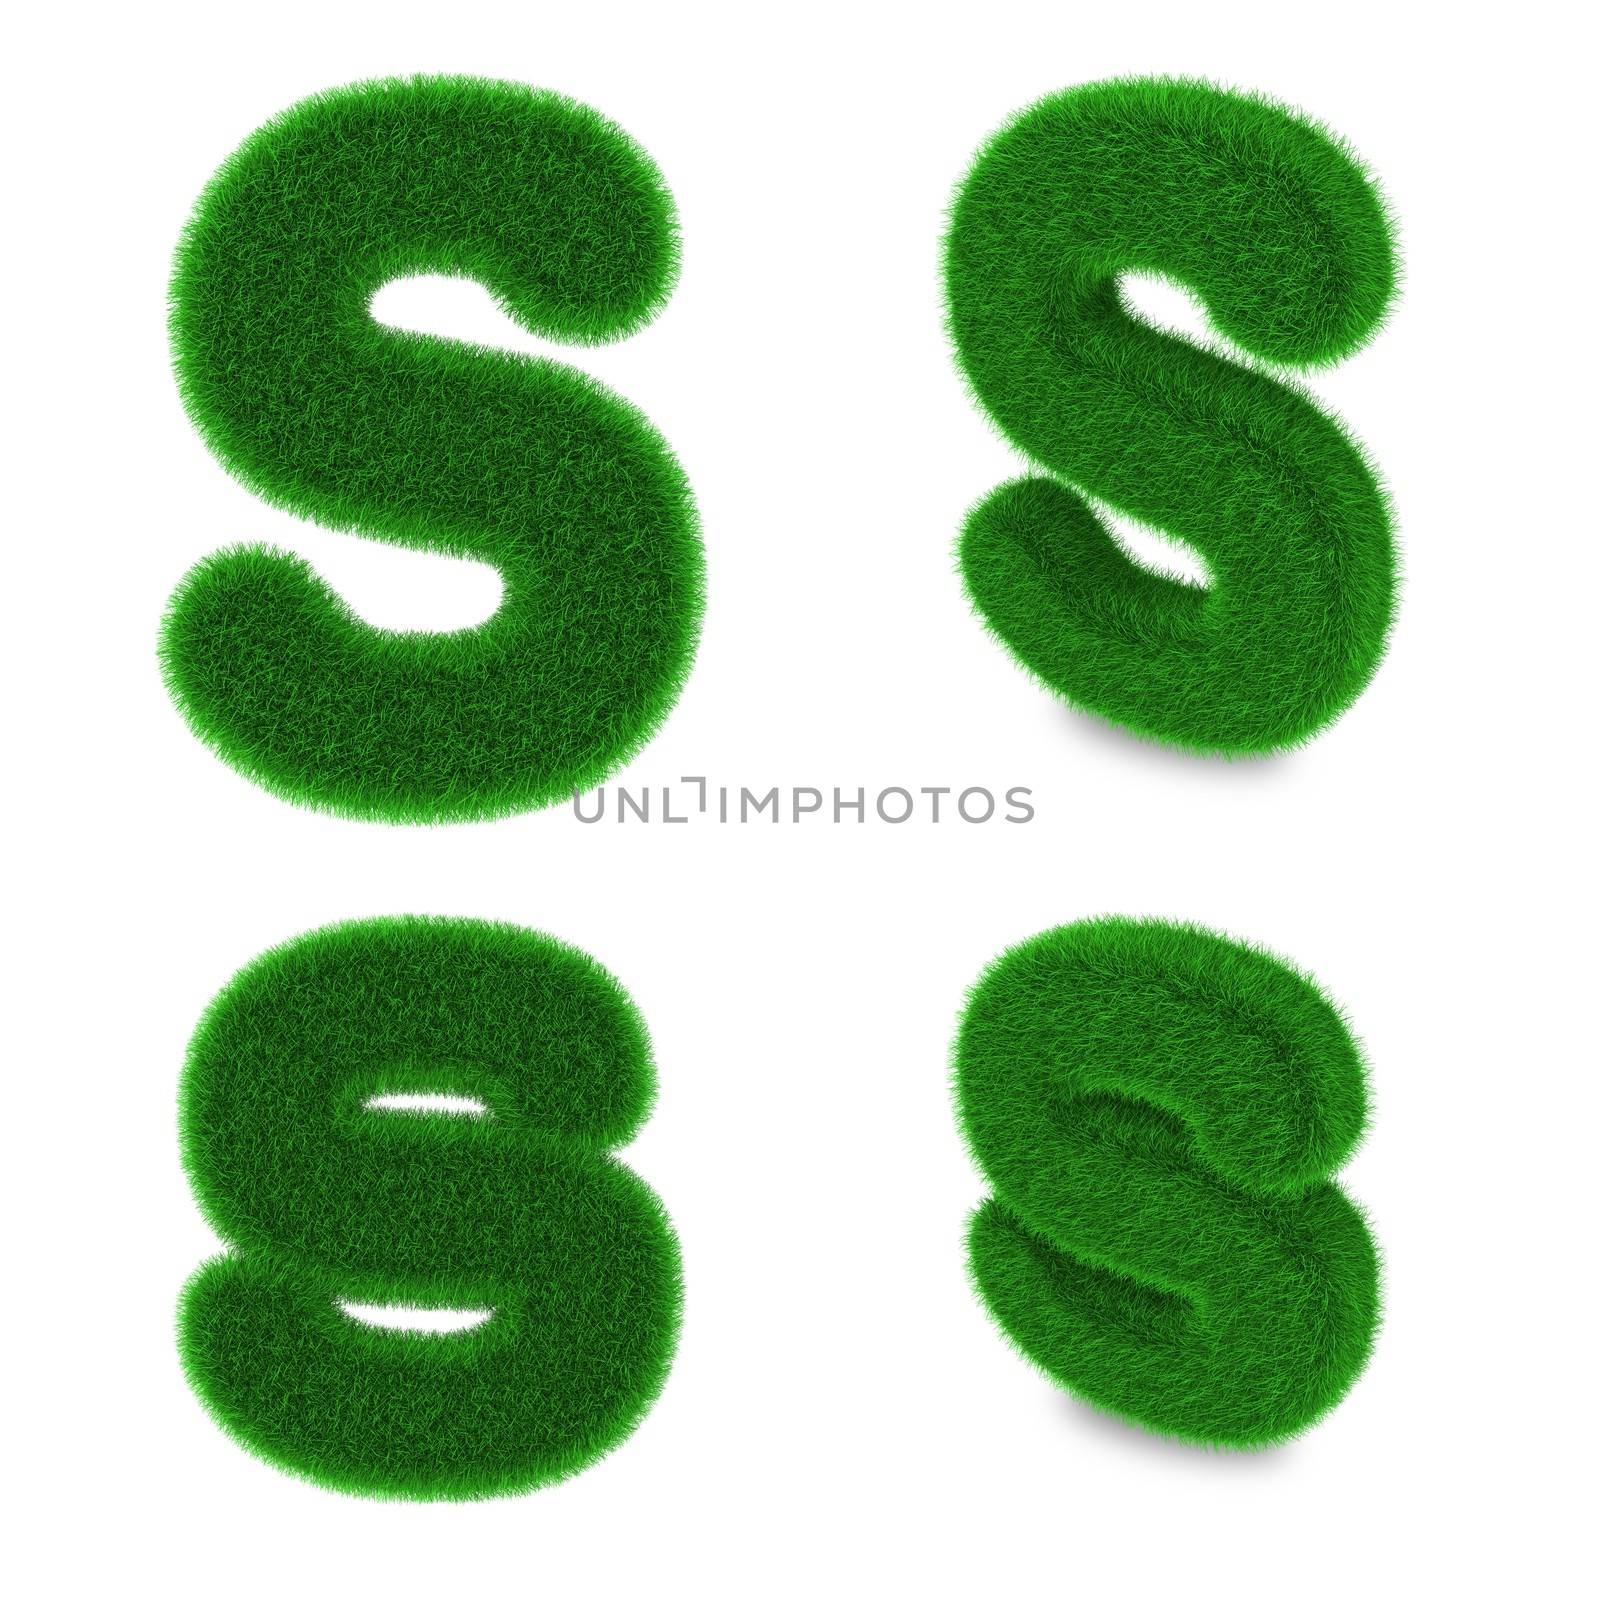 Letter S covered by green grass isolated on white background